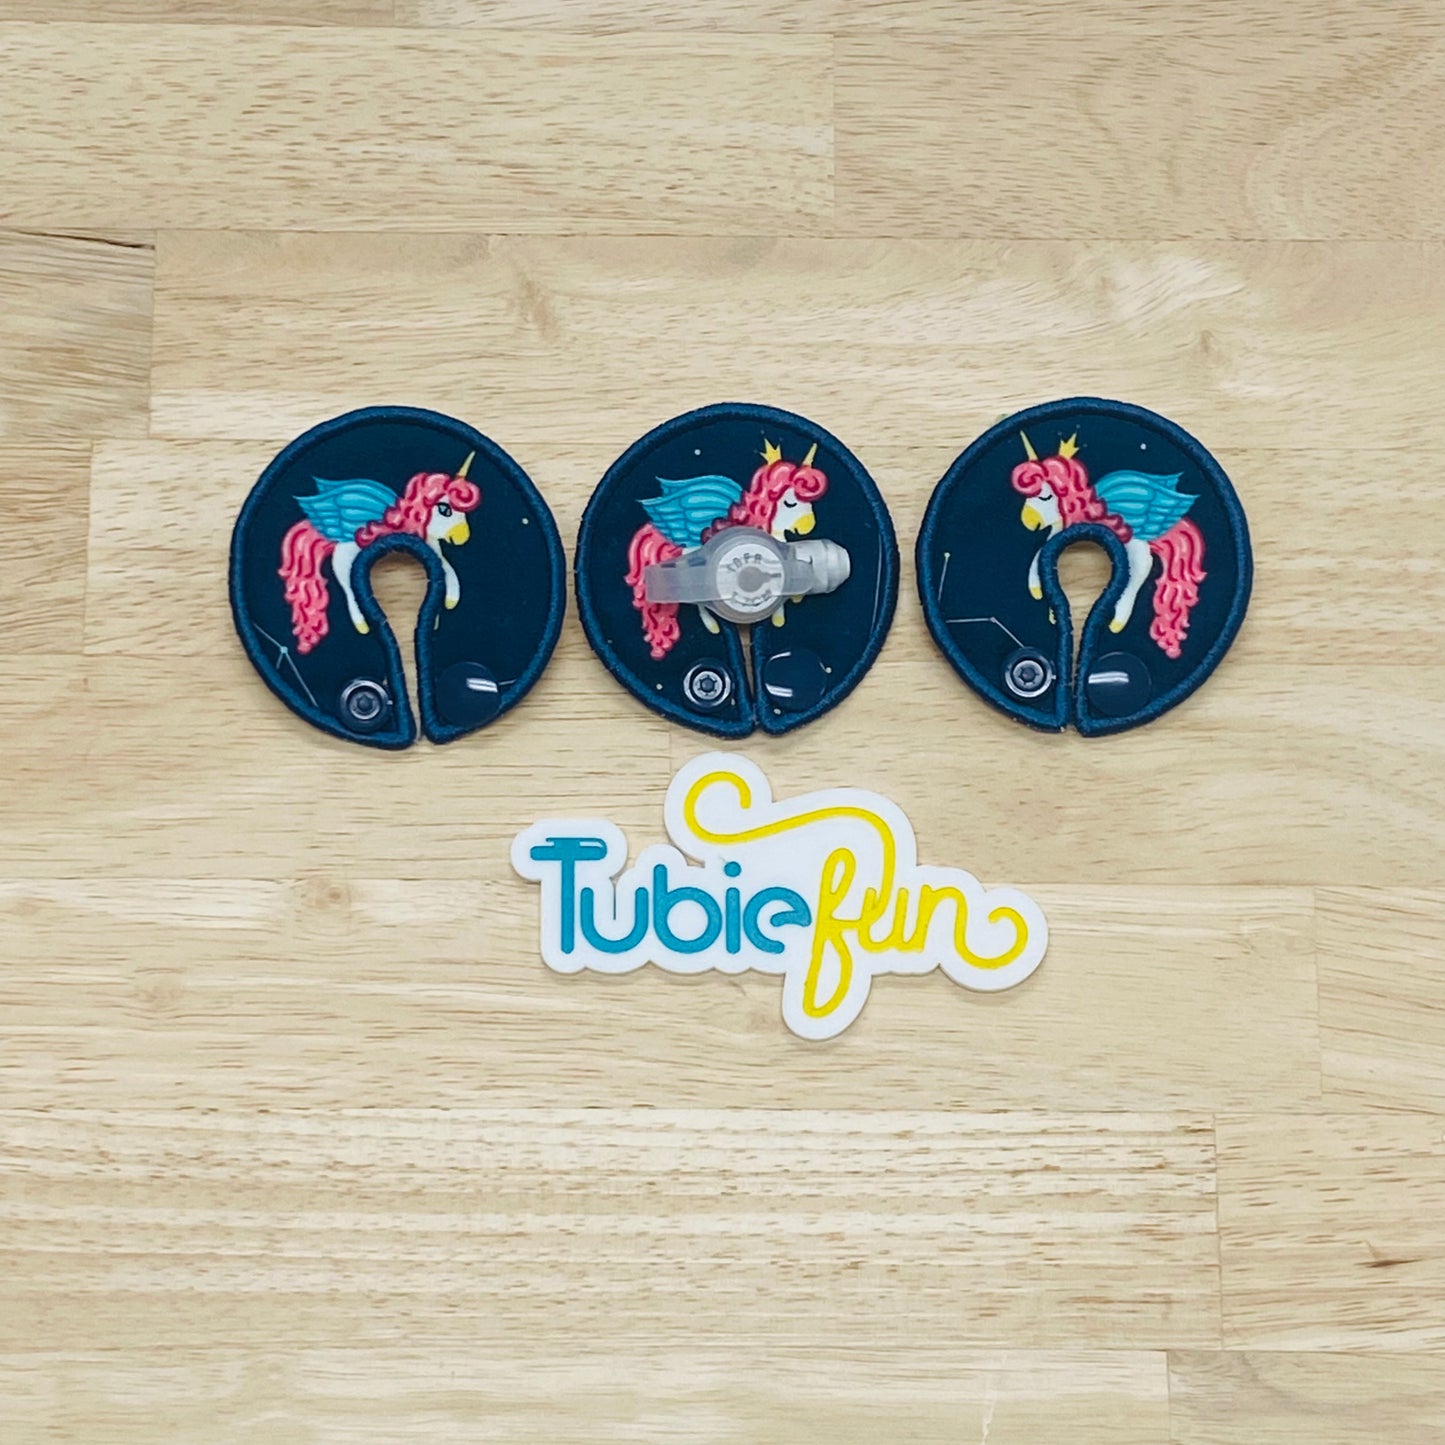 G-Tube Button Pad Cover - Flying Unicorns on Blue